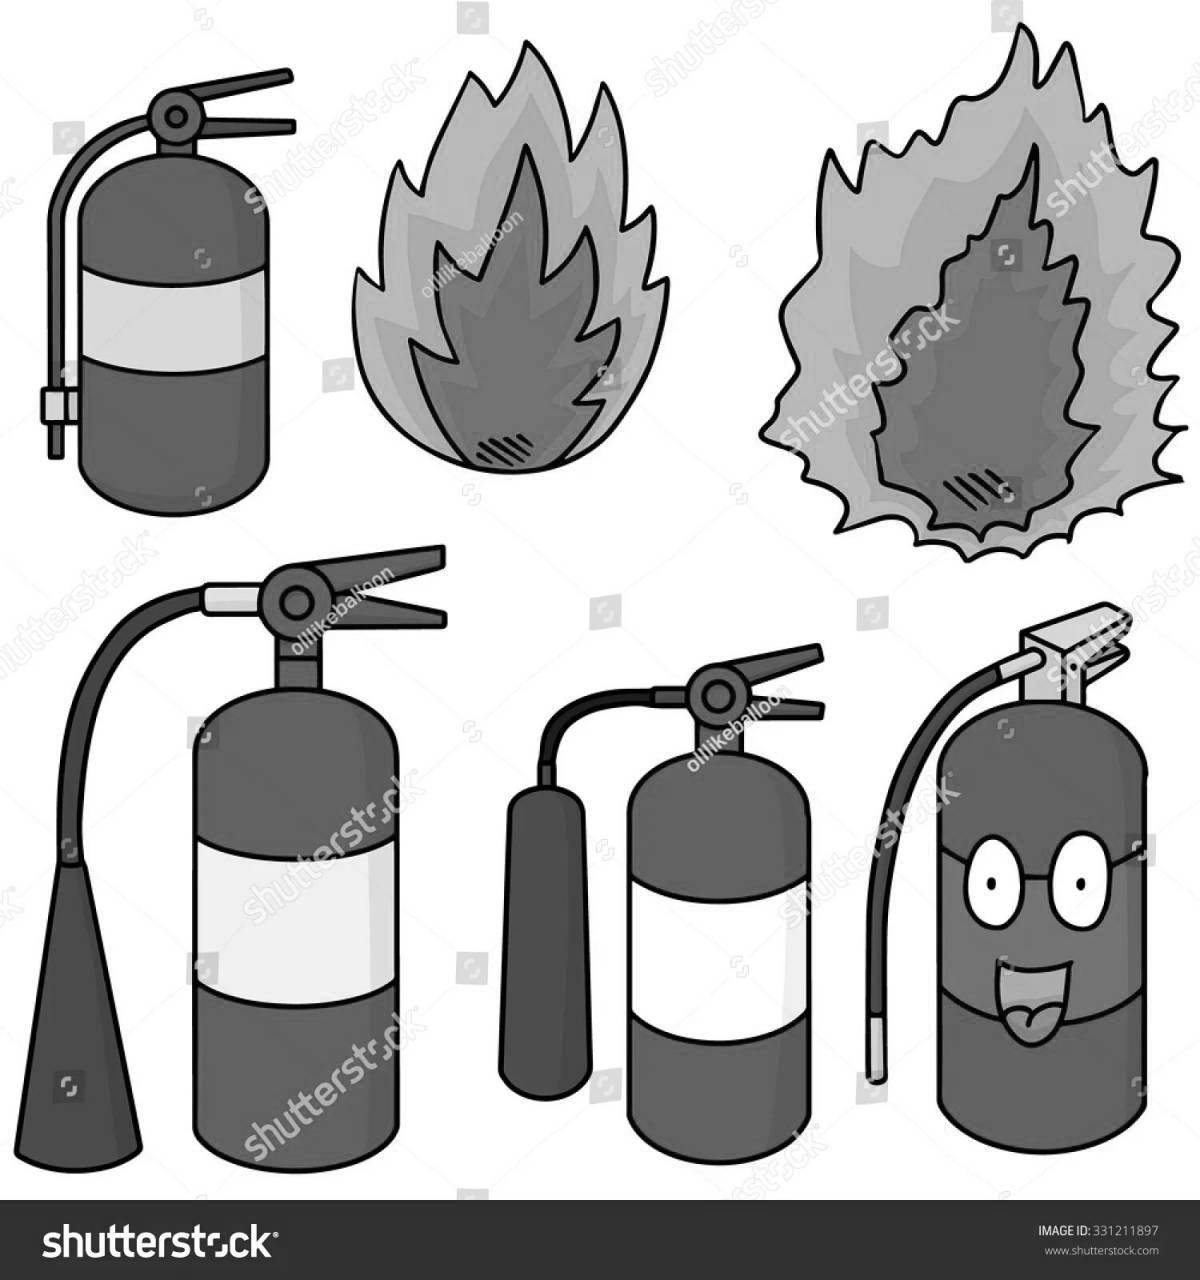 Stimulating fire extinguisher coloring book for 5-6 year olds